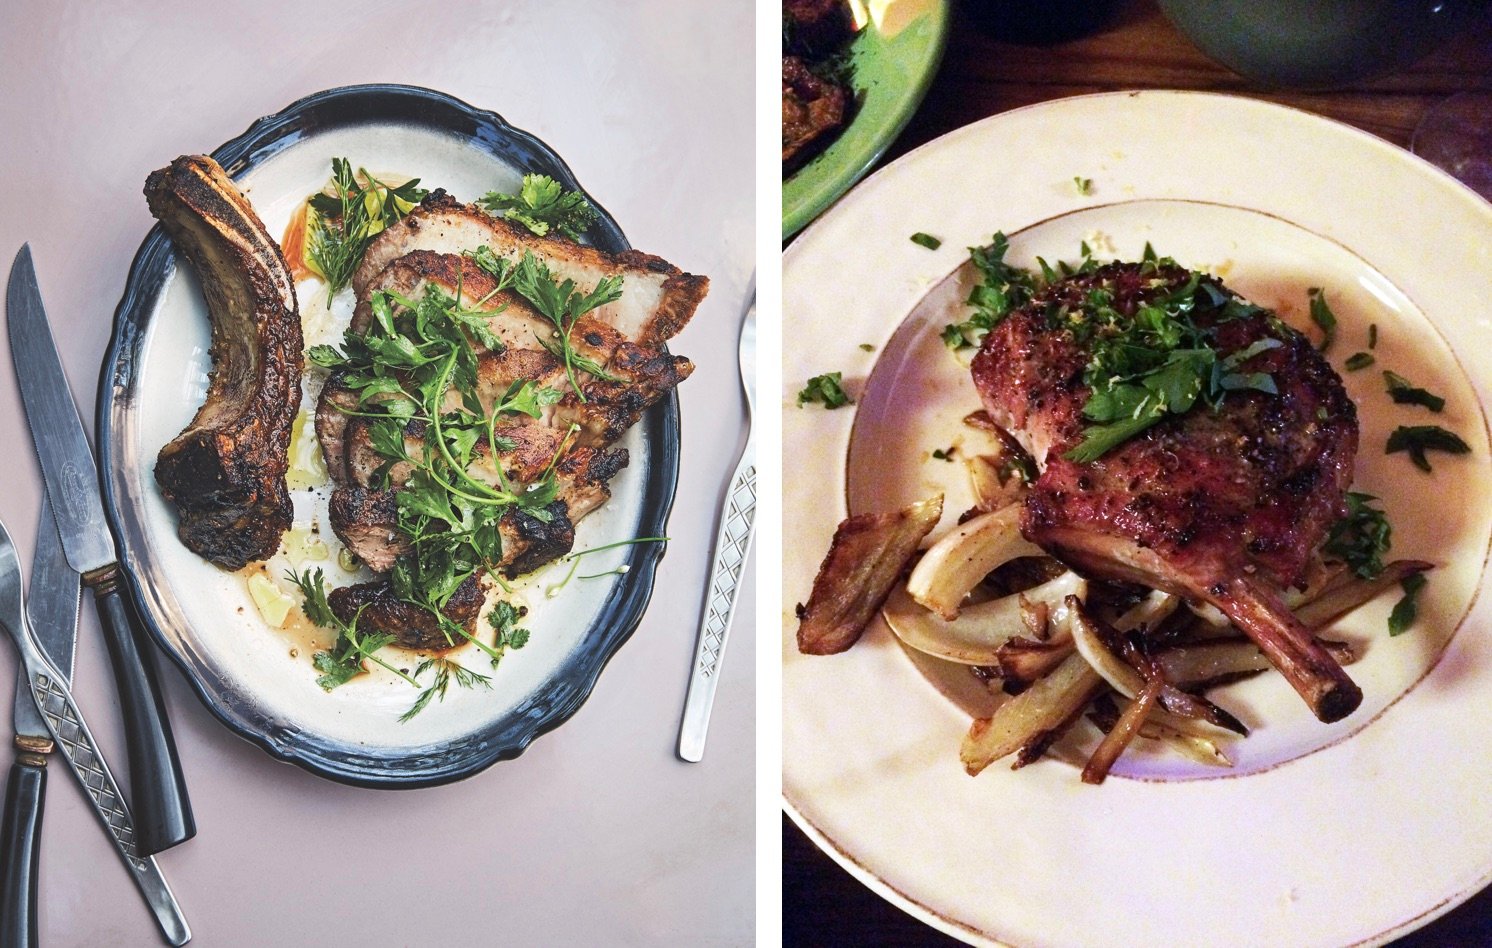 Side-by-side shots of pork chops from Alison Roman's cookbook